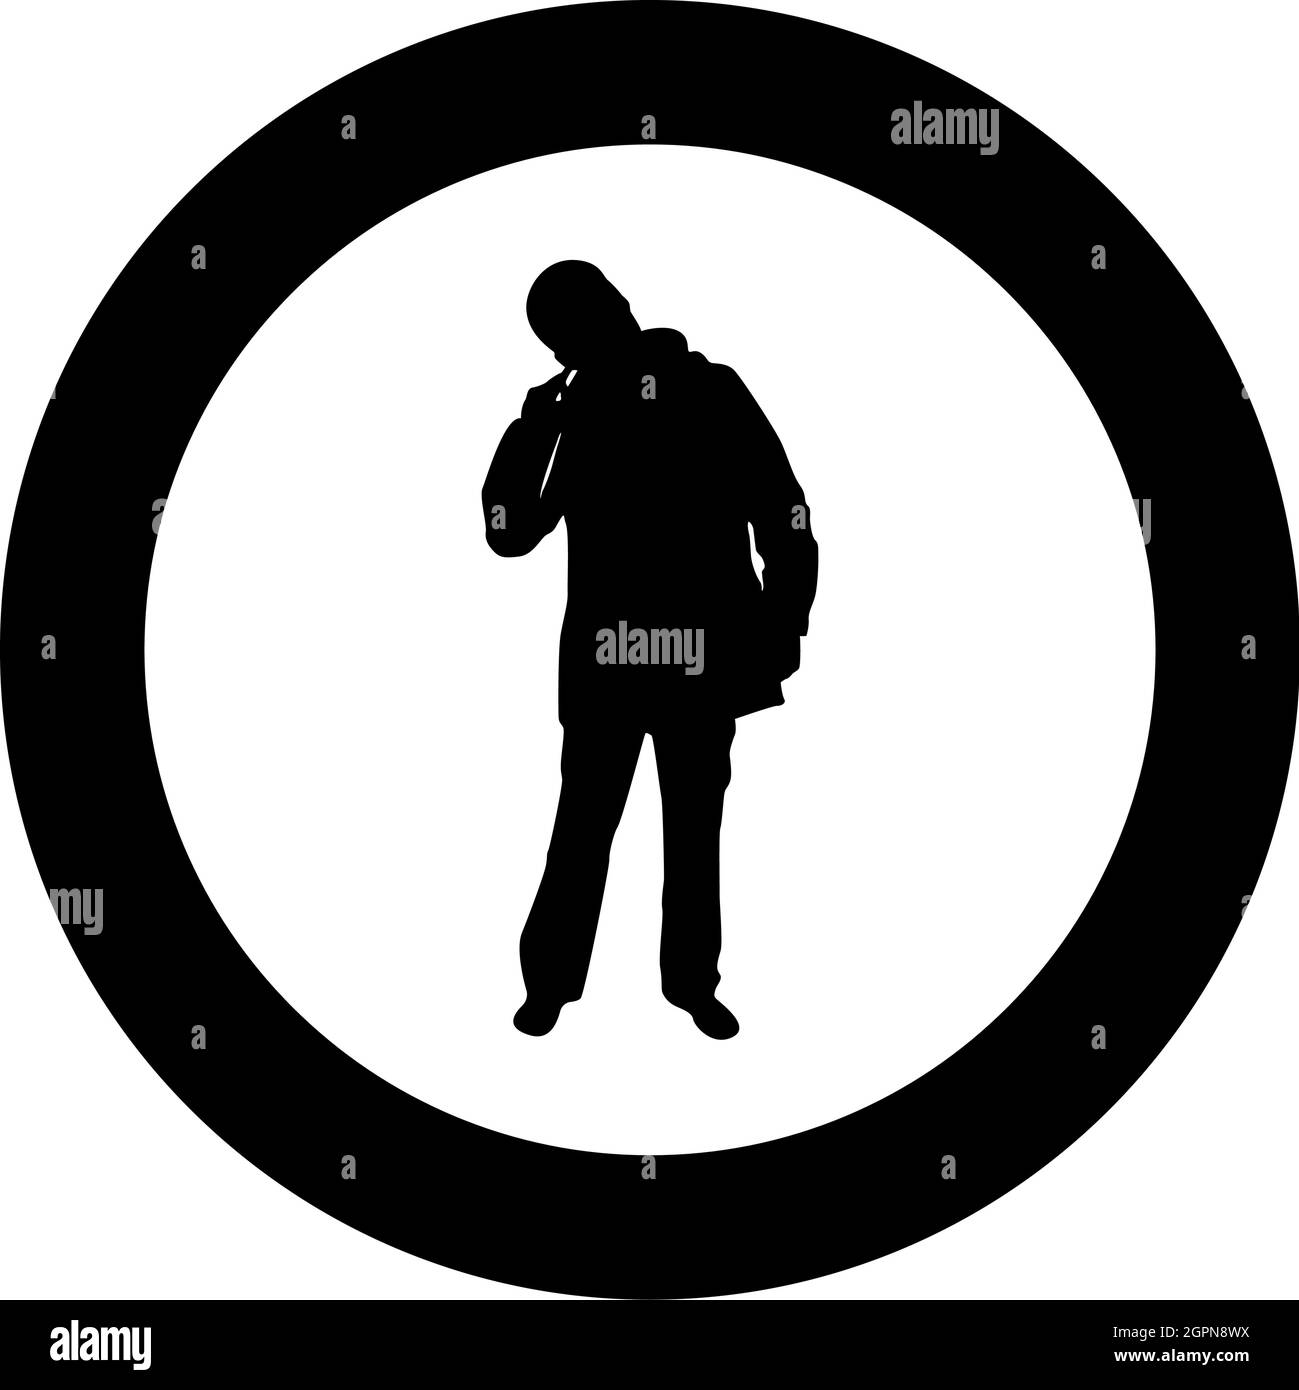 Male picking in ear using finger Male clearing earwax Clean body concept Caring for cleanliness idea Hygiene Cleanup hygienic silhouette in circle round black color vector illustration solid outline style image Stock Vector